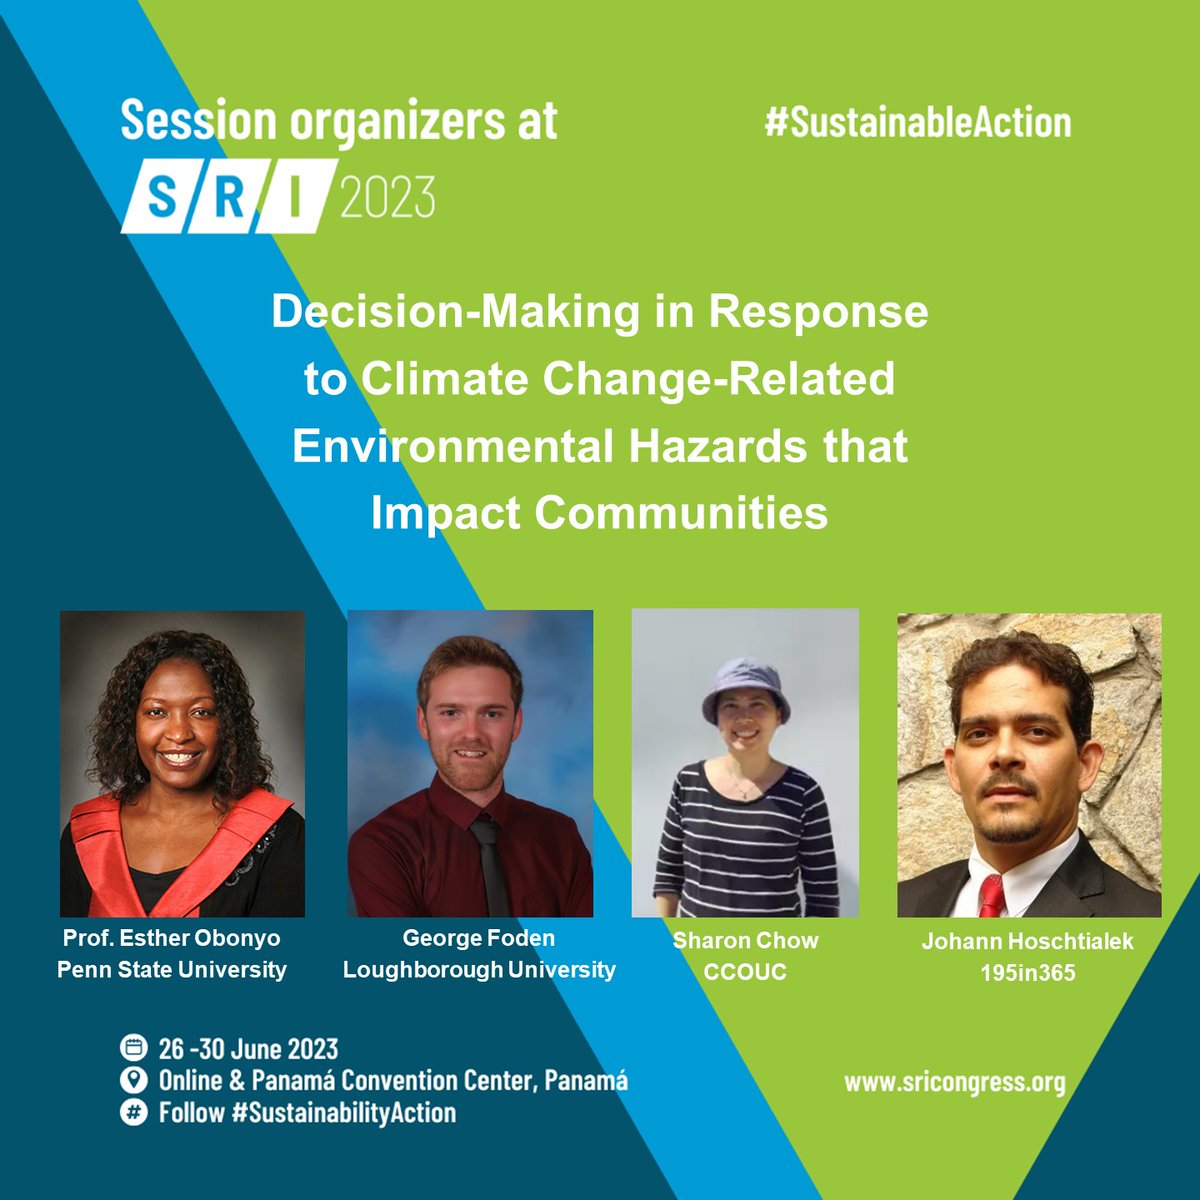 Join us at @SRICongress for our hybrid panel session where we'll be discussing climate action, humanitarian response, resilience and sustainability frameworks, and community engagement to better prepare for and respond to disasters.

#SustainableAction

2023.sricongress.org/agenda/session…